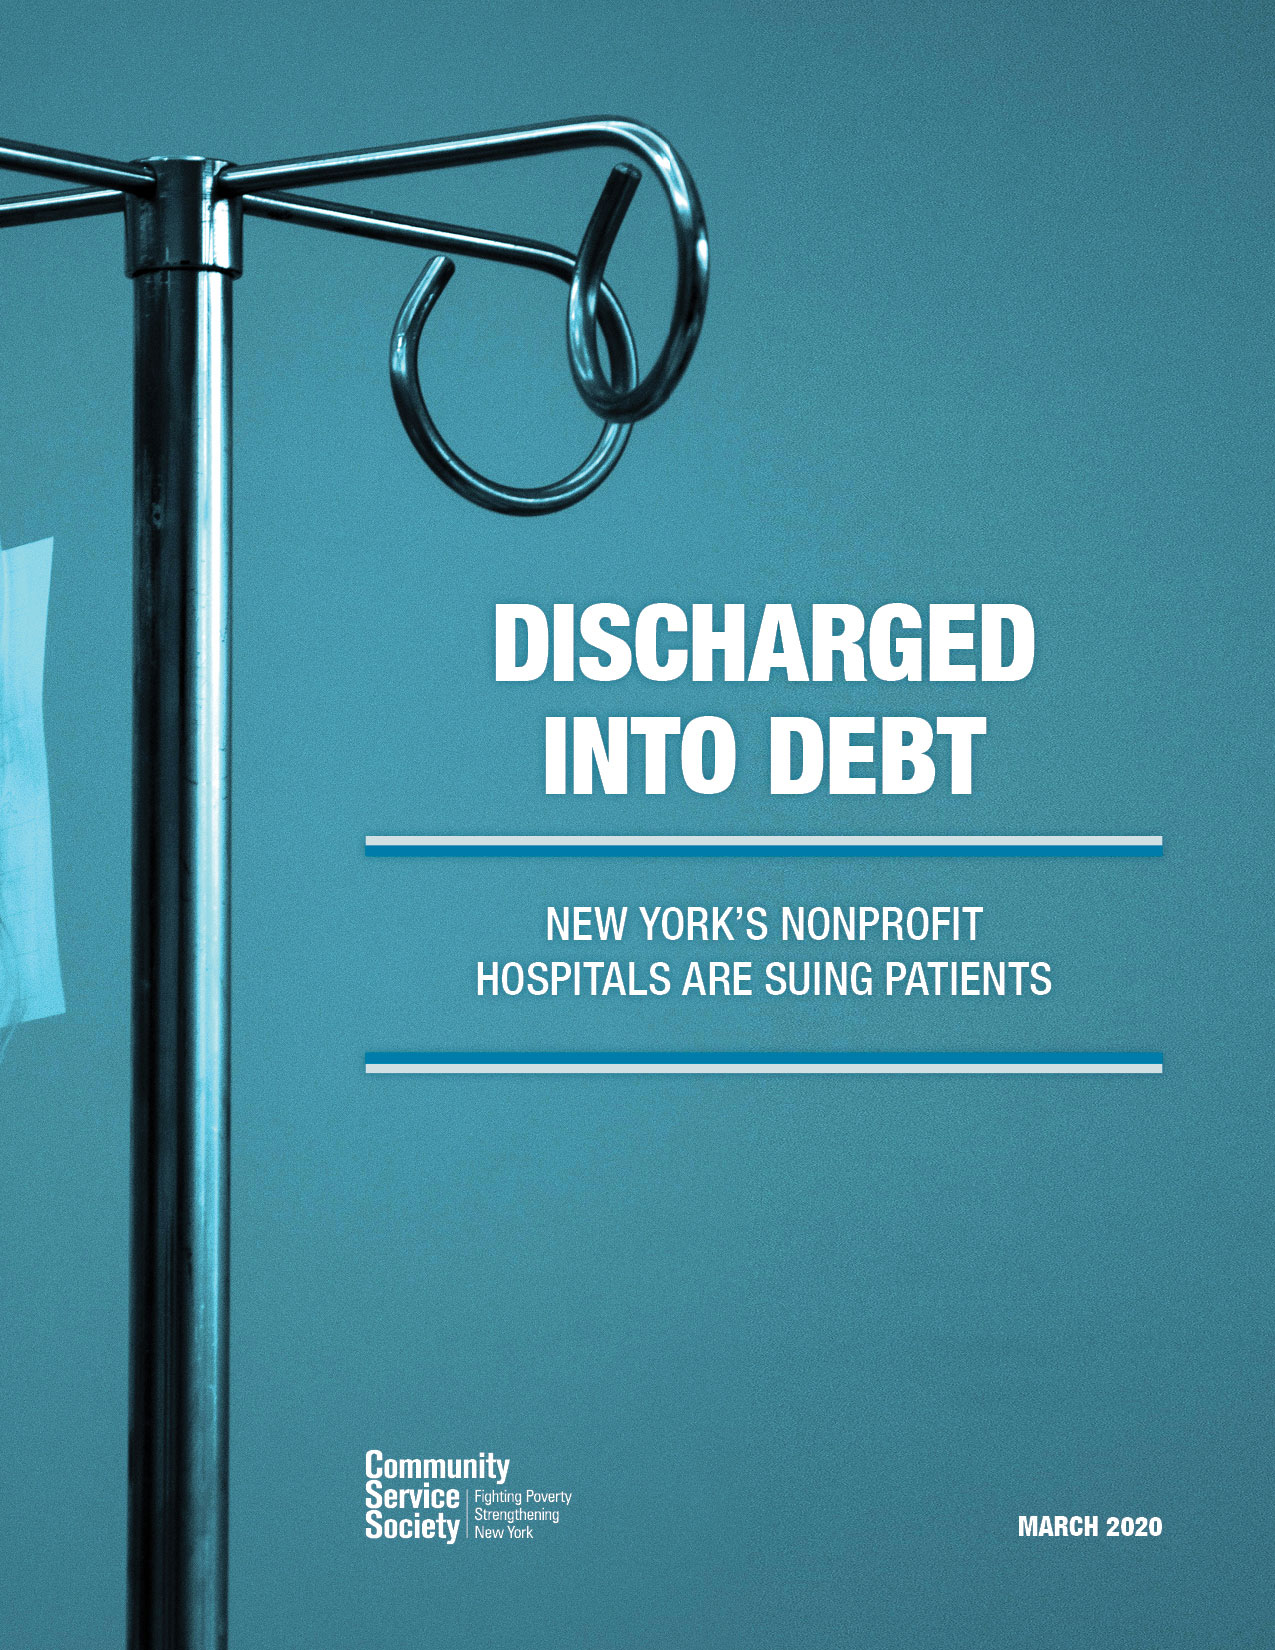 Discharged into Debt: New York’s Nonprofit Hospitals are Suing Patients